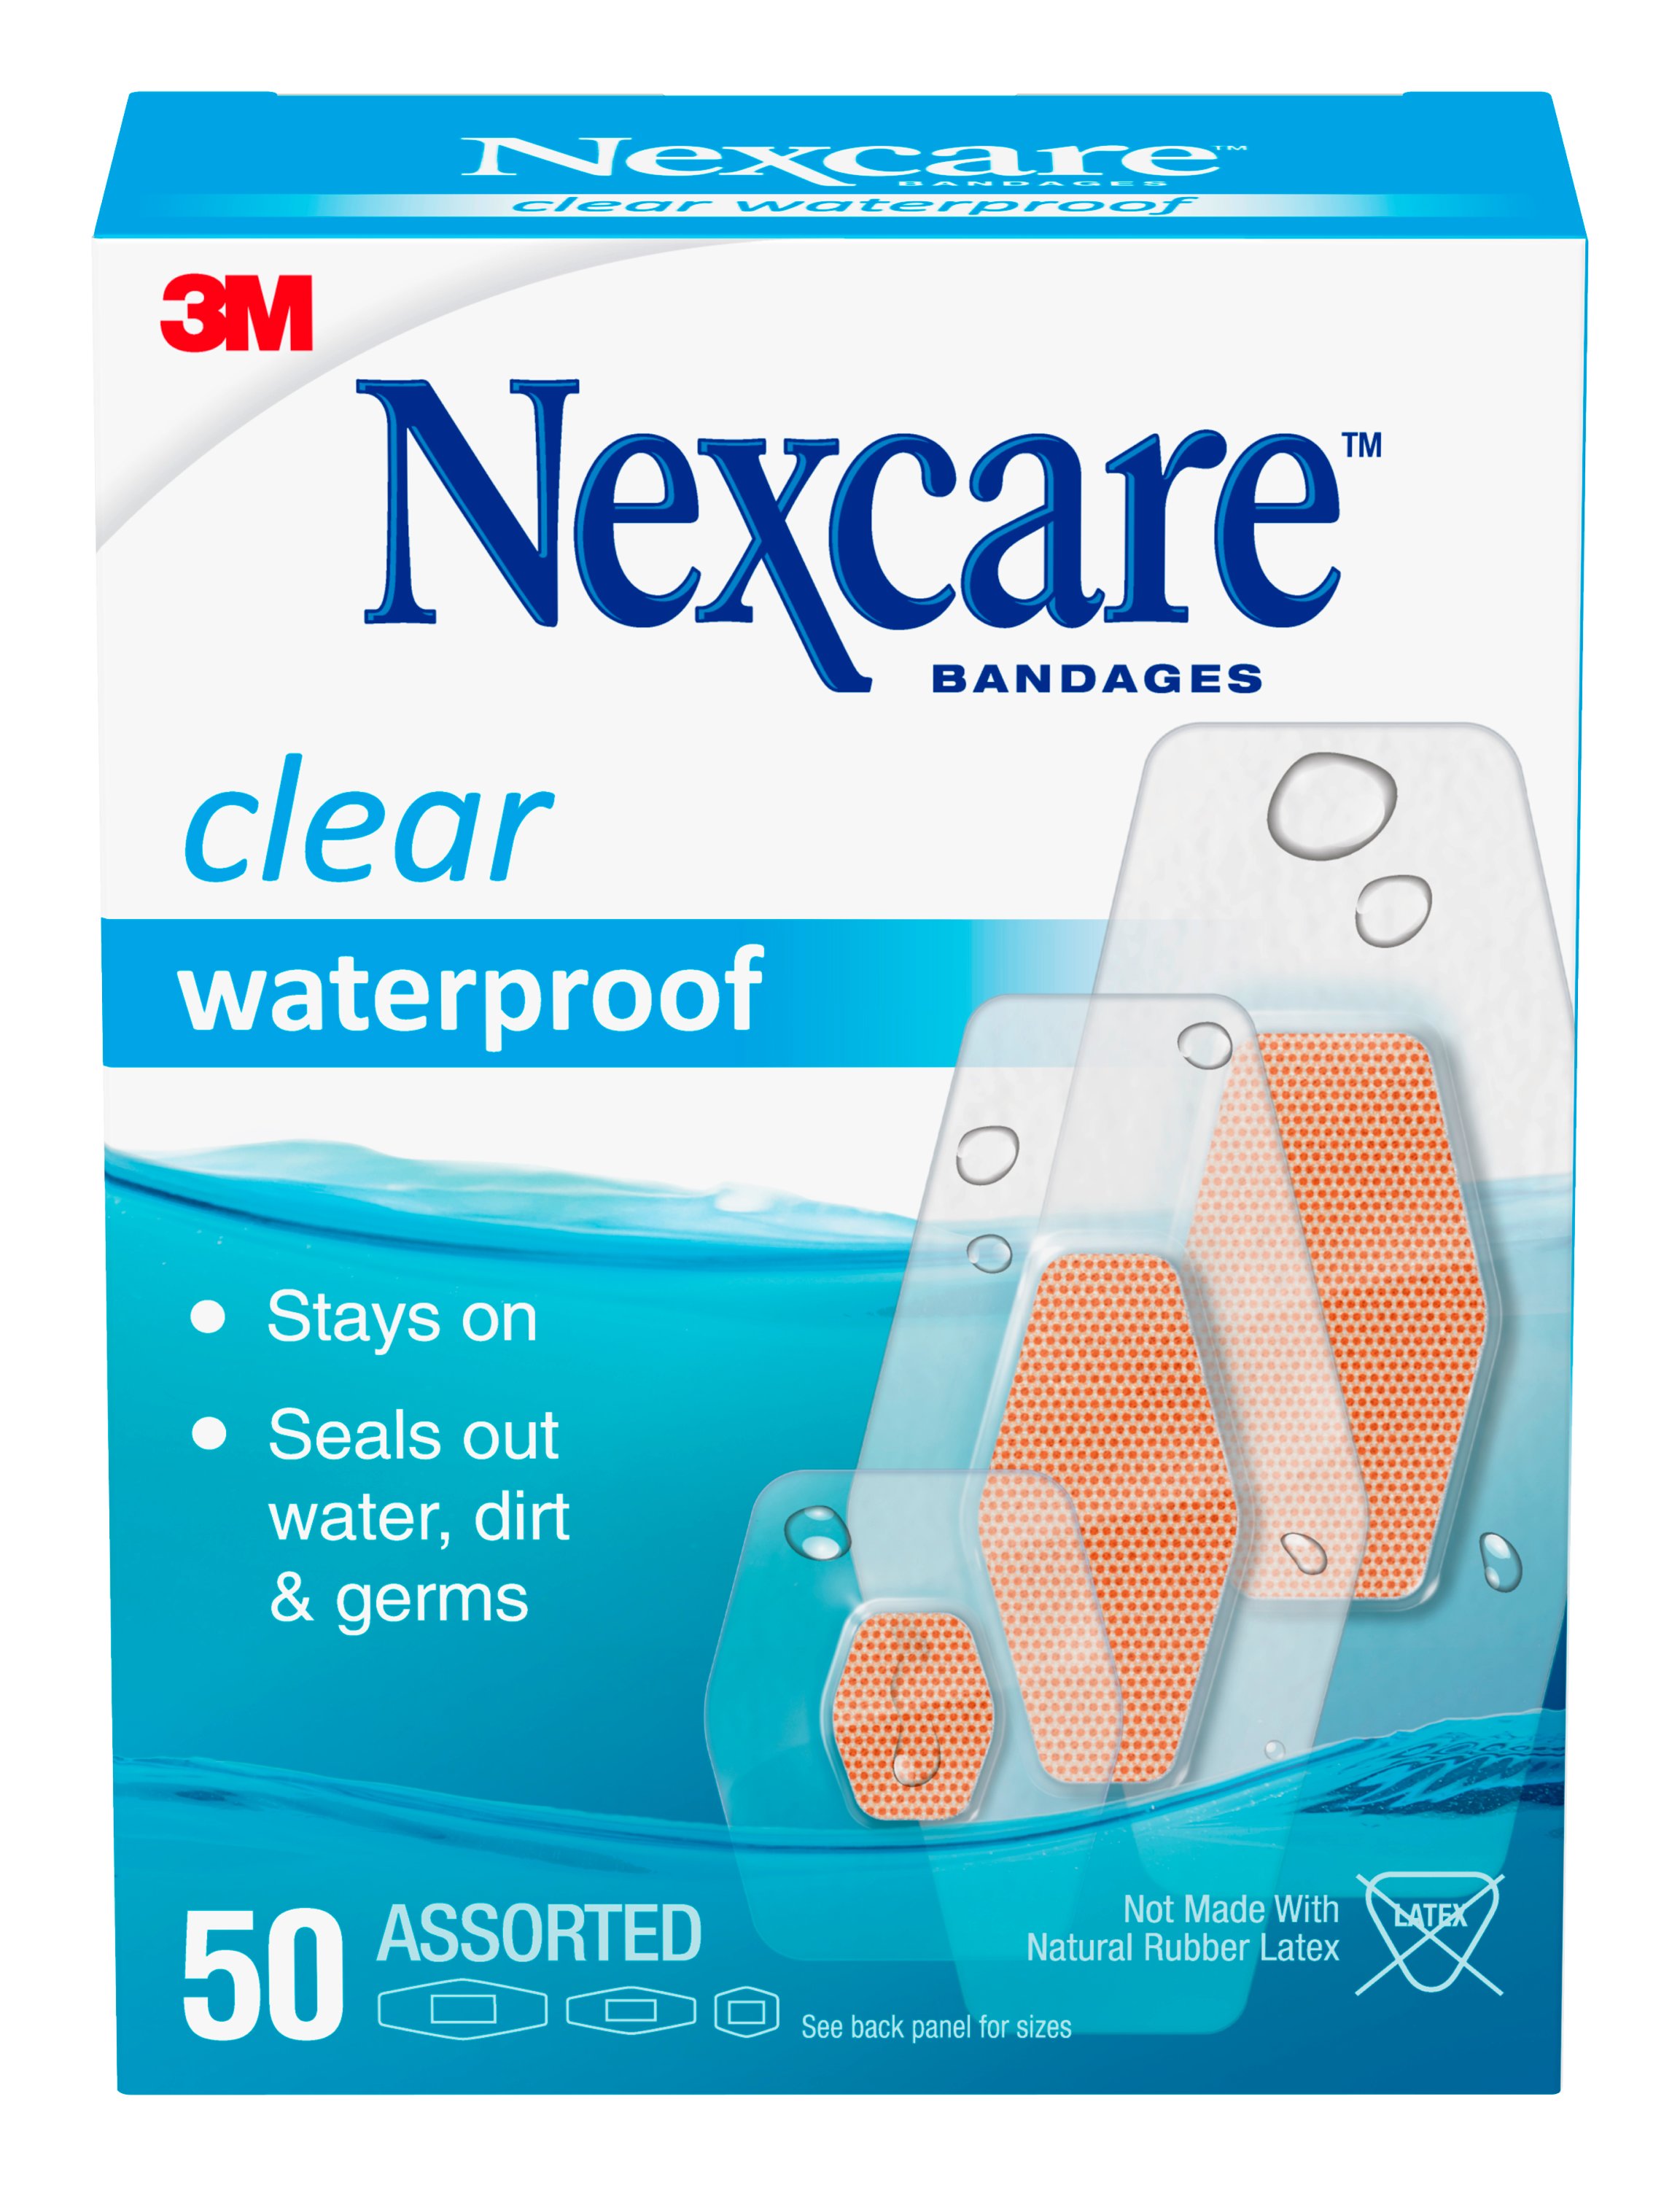 Nexcare Waterproof Bandages - Pack of 50 Bandages - image 1 of 19